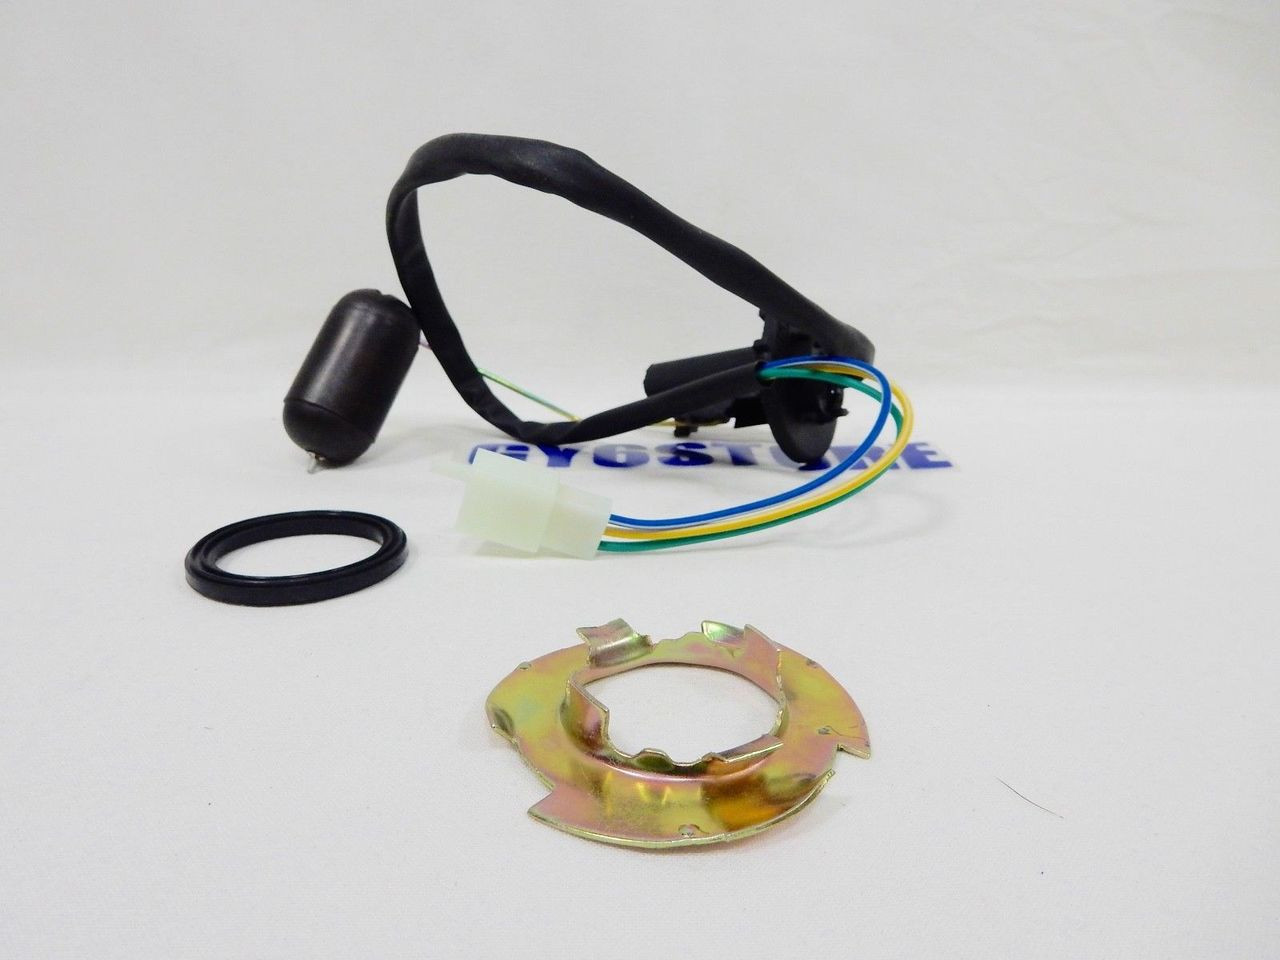 FUEL TANK SENSOR (SENDING UNIT) FOR SCOOTER WITH QMB139 AND GY6 MOTORS *TYPE 3*